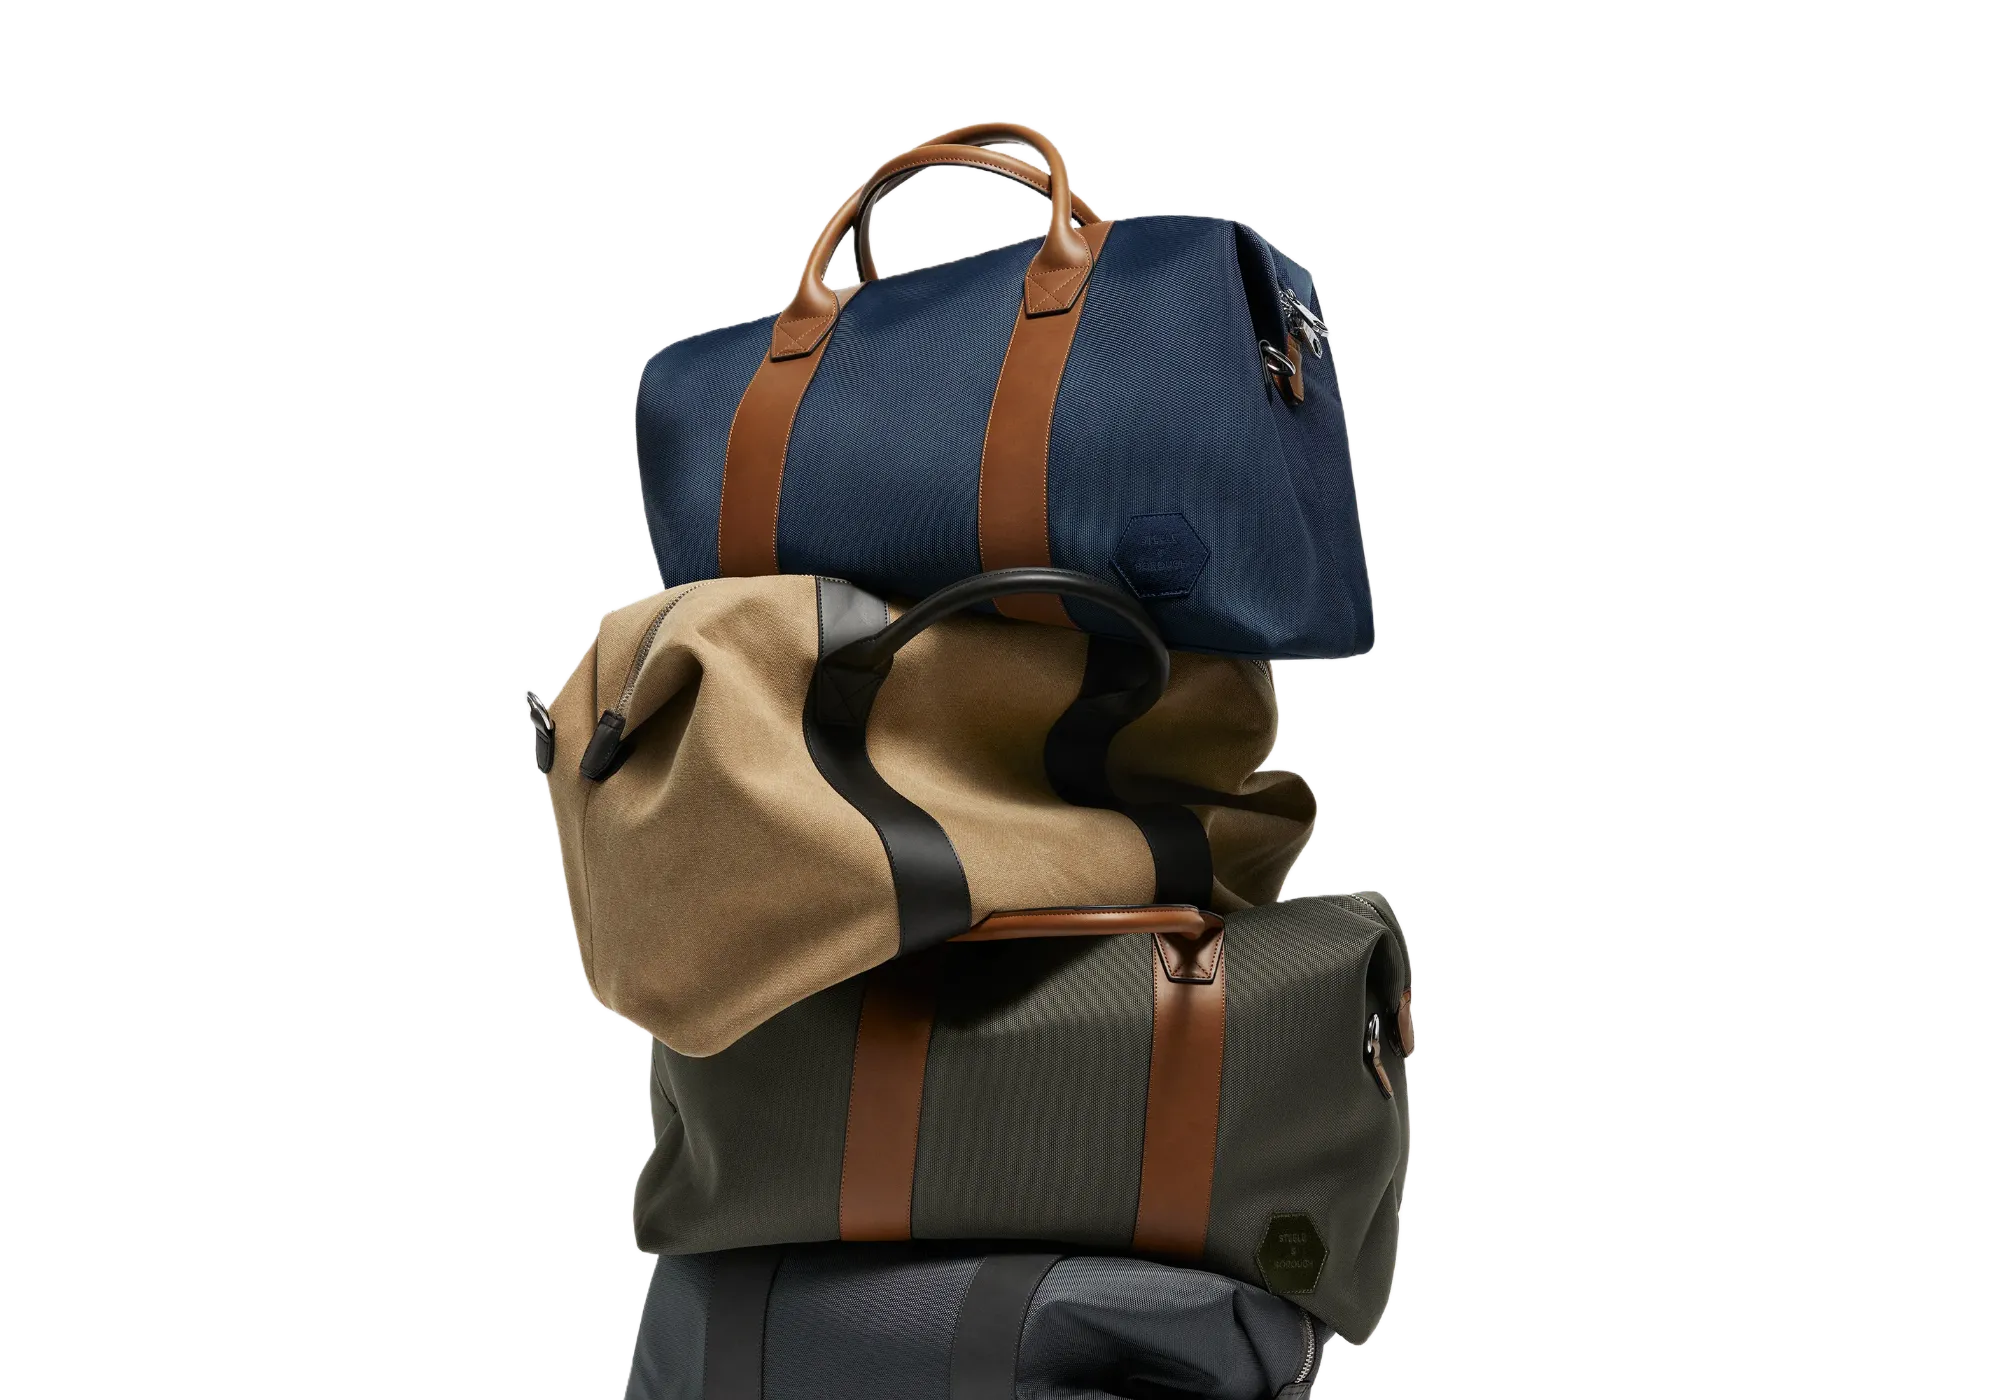 A stack of Steele & Borough weekender bags in an array of colors including navy blue, tan, and olive green, each featuring the signature tan straps and the discreet logo, signifying versatility and style